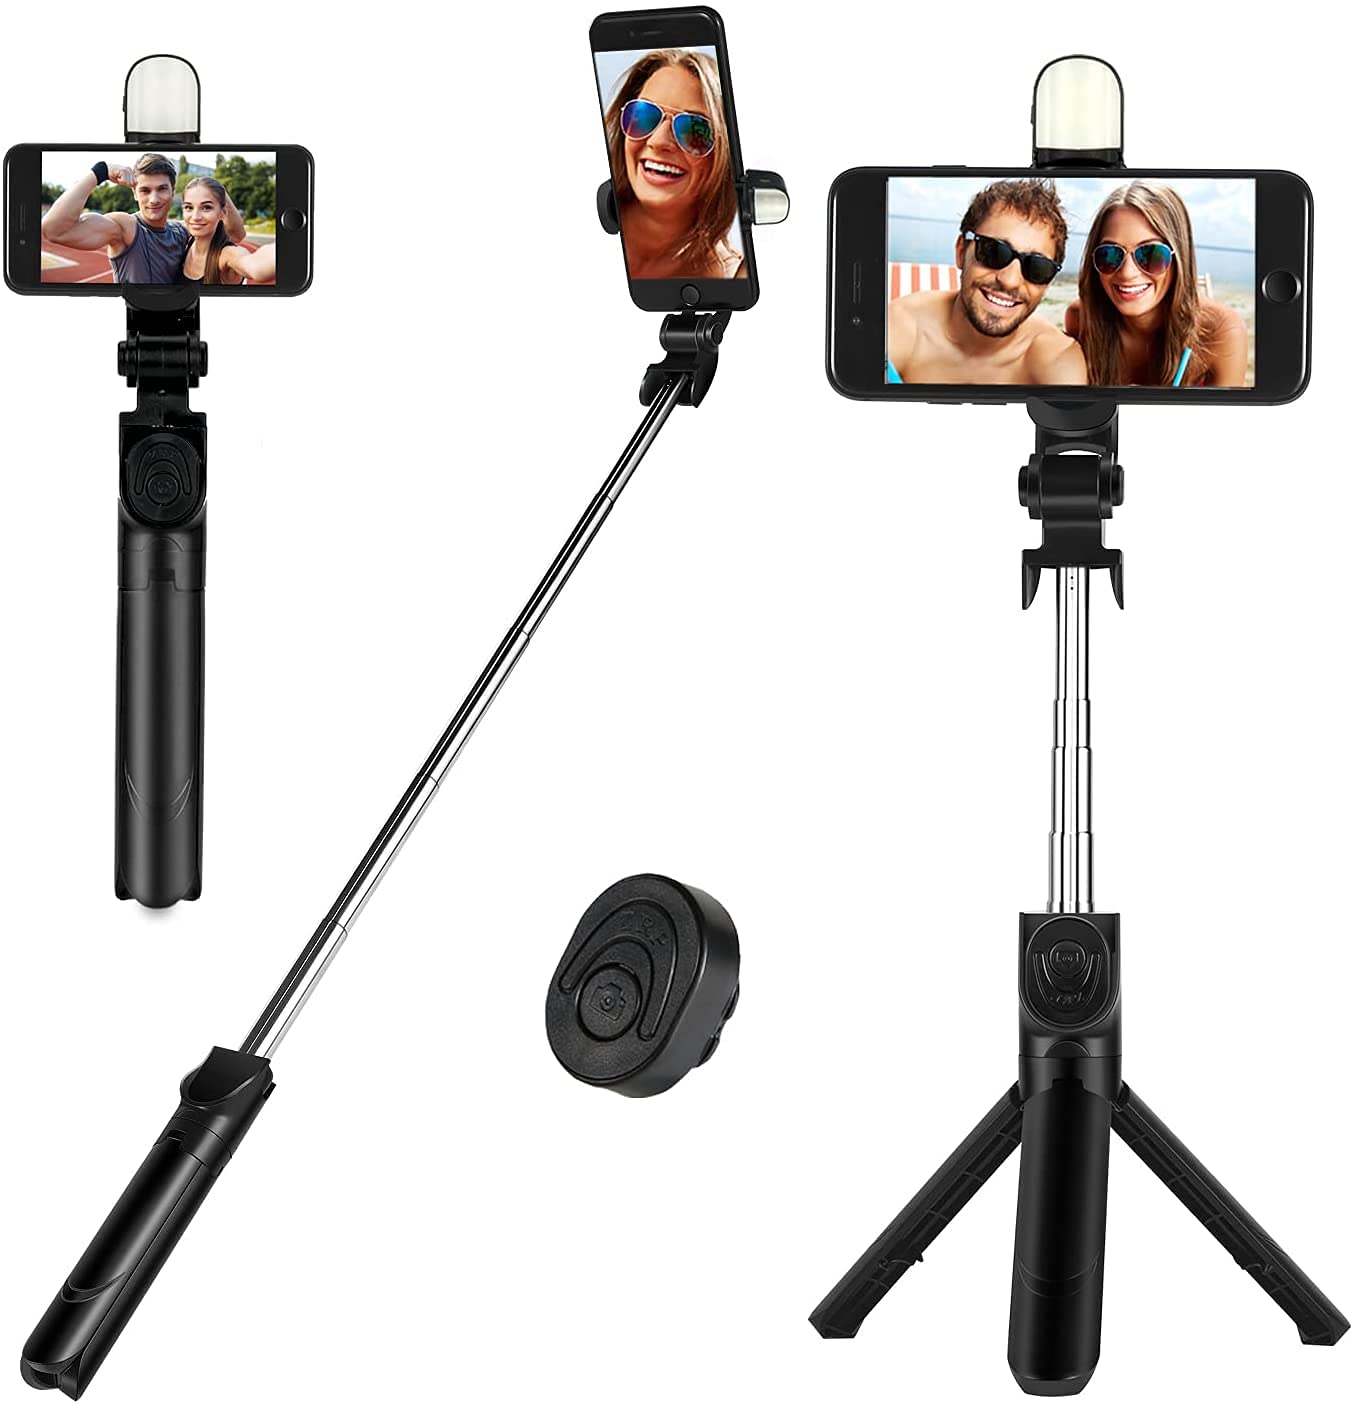 Tripod Mobile Stand & Selfie Stick with LED Light & Bluetooth Remote 4 in 1 (Black)